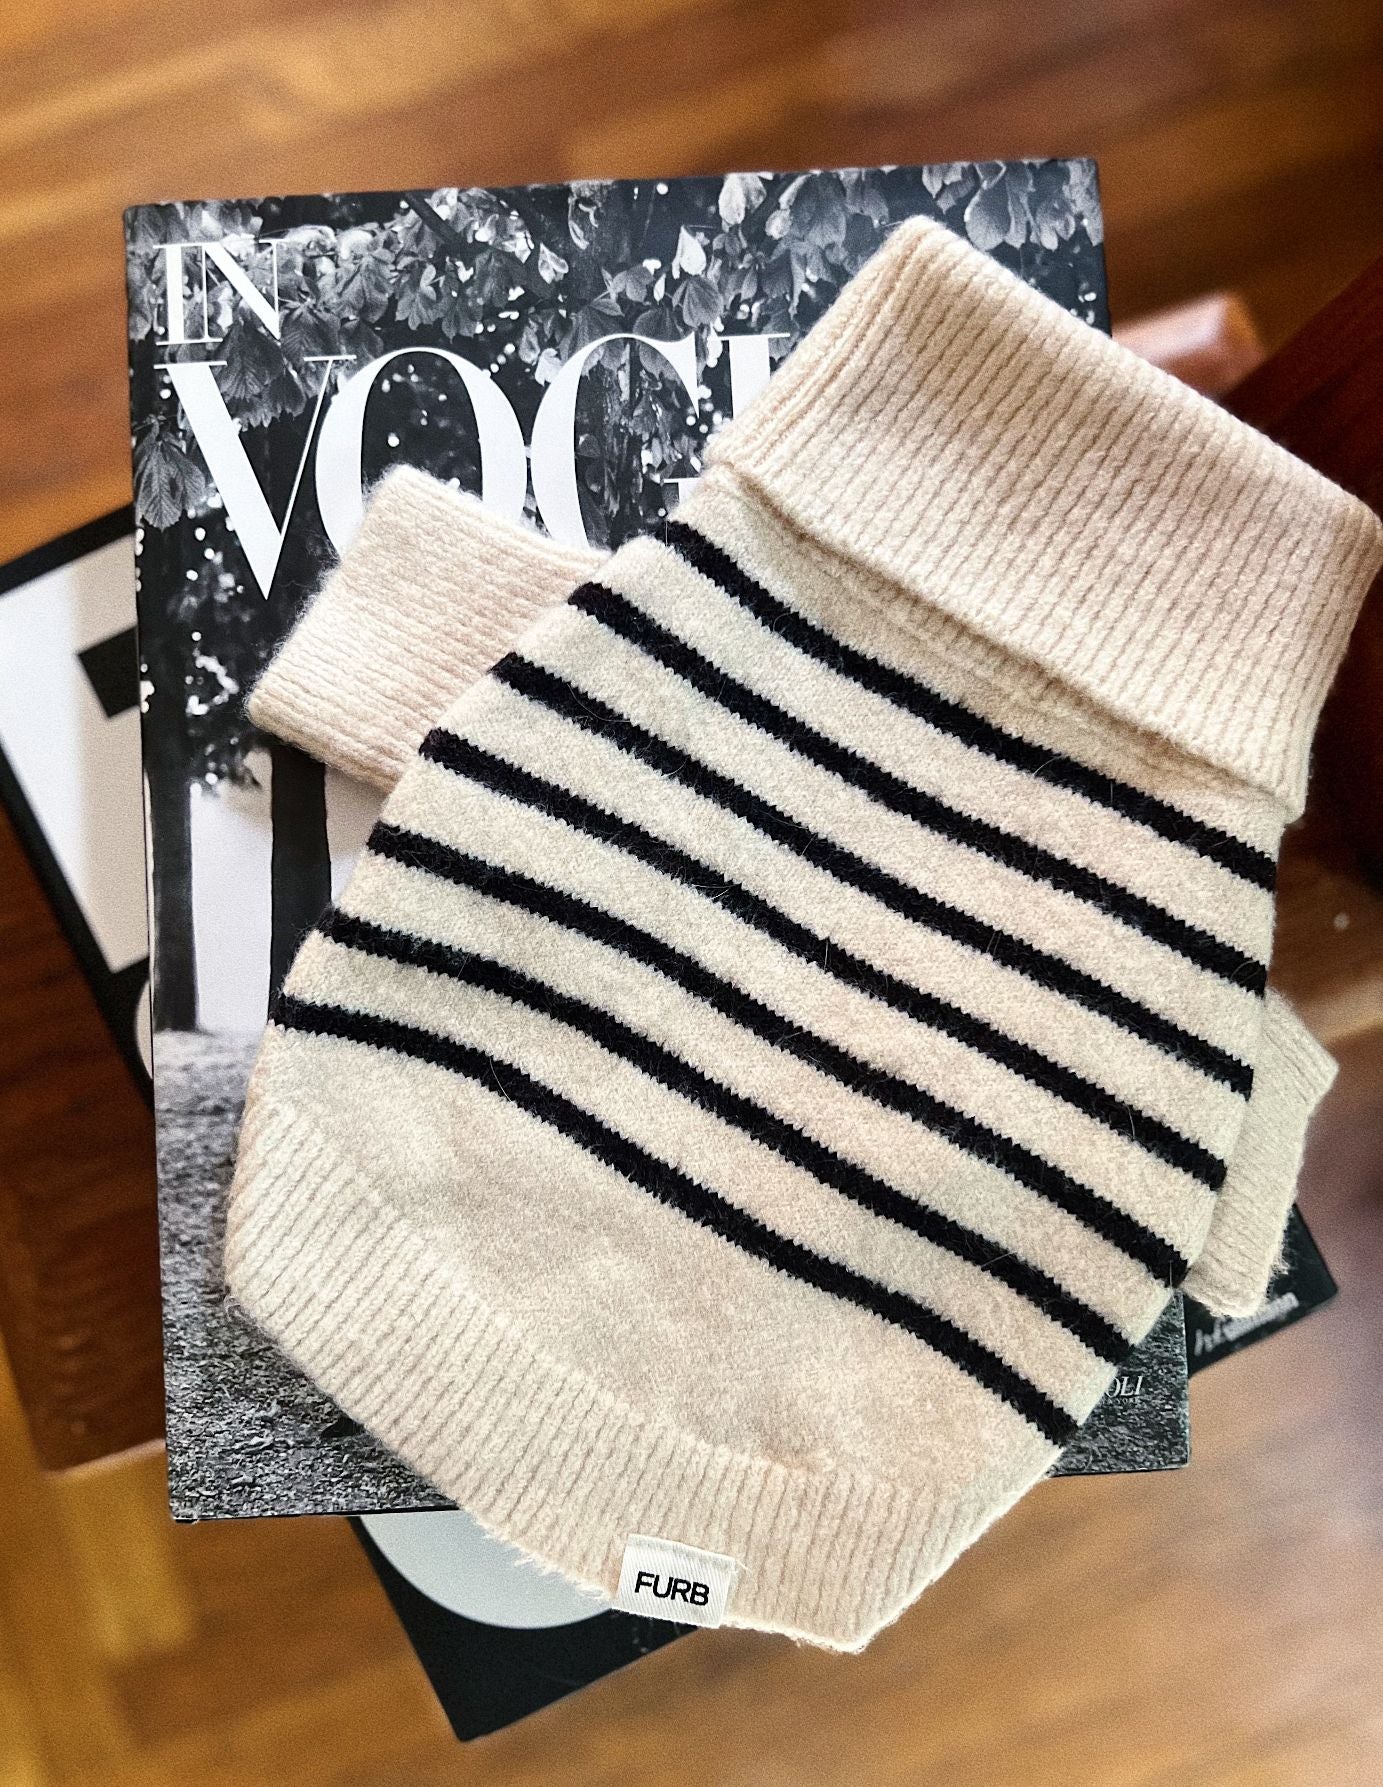 a striped dream, with a comfy ivory knit body covered in thin black stripes, and perfect ribbed ivory turtleneck with coordinating sleeves. The long turtleneck folds over as a toasty touch, and sleeves can be cuffed for a more casual vibe